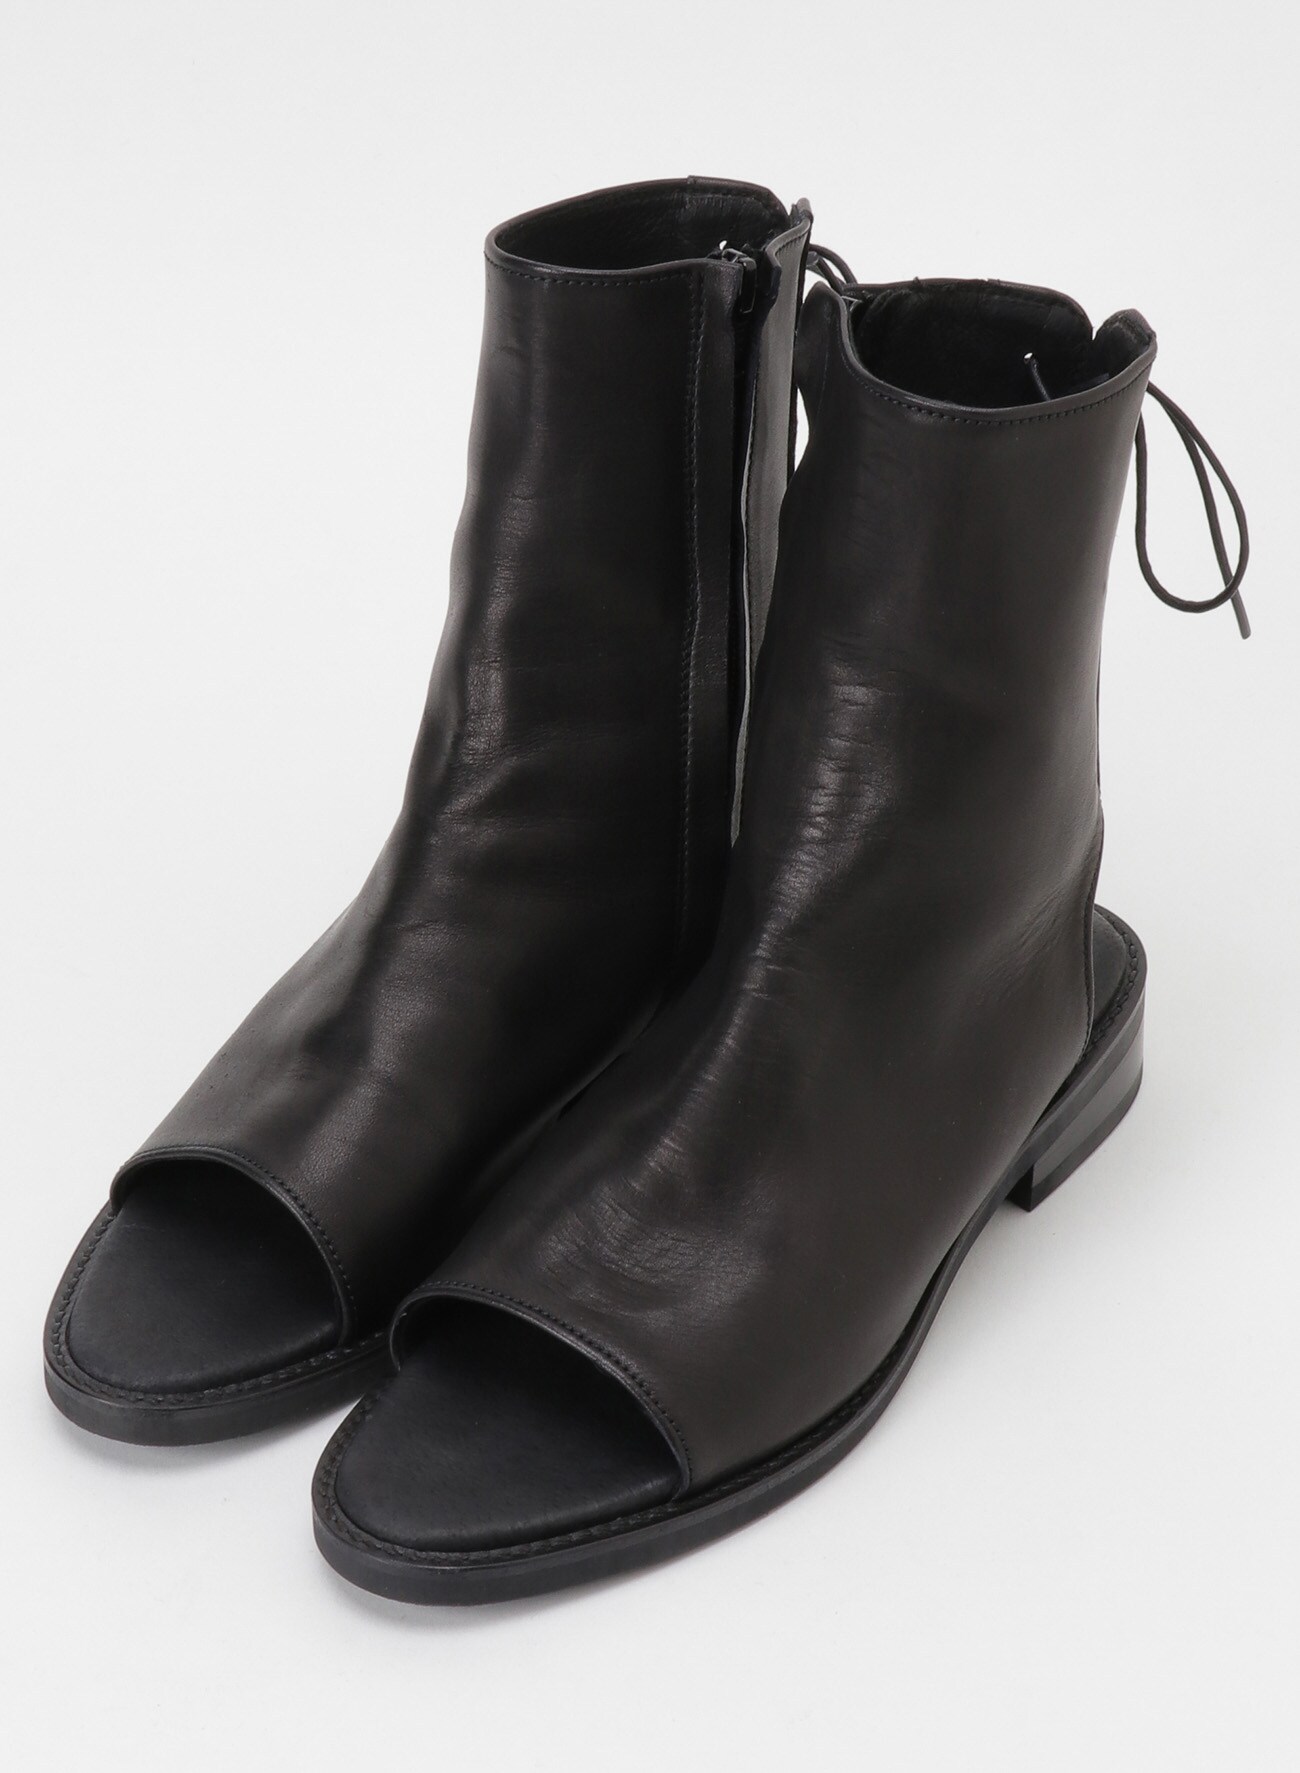 SOFT SMOOTH LEATHER OPEN TOE/HEEL BOOTS